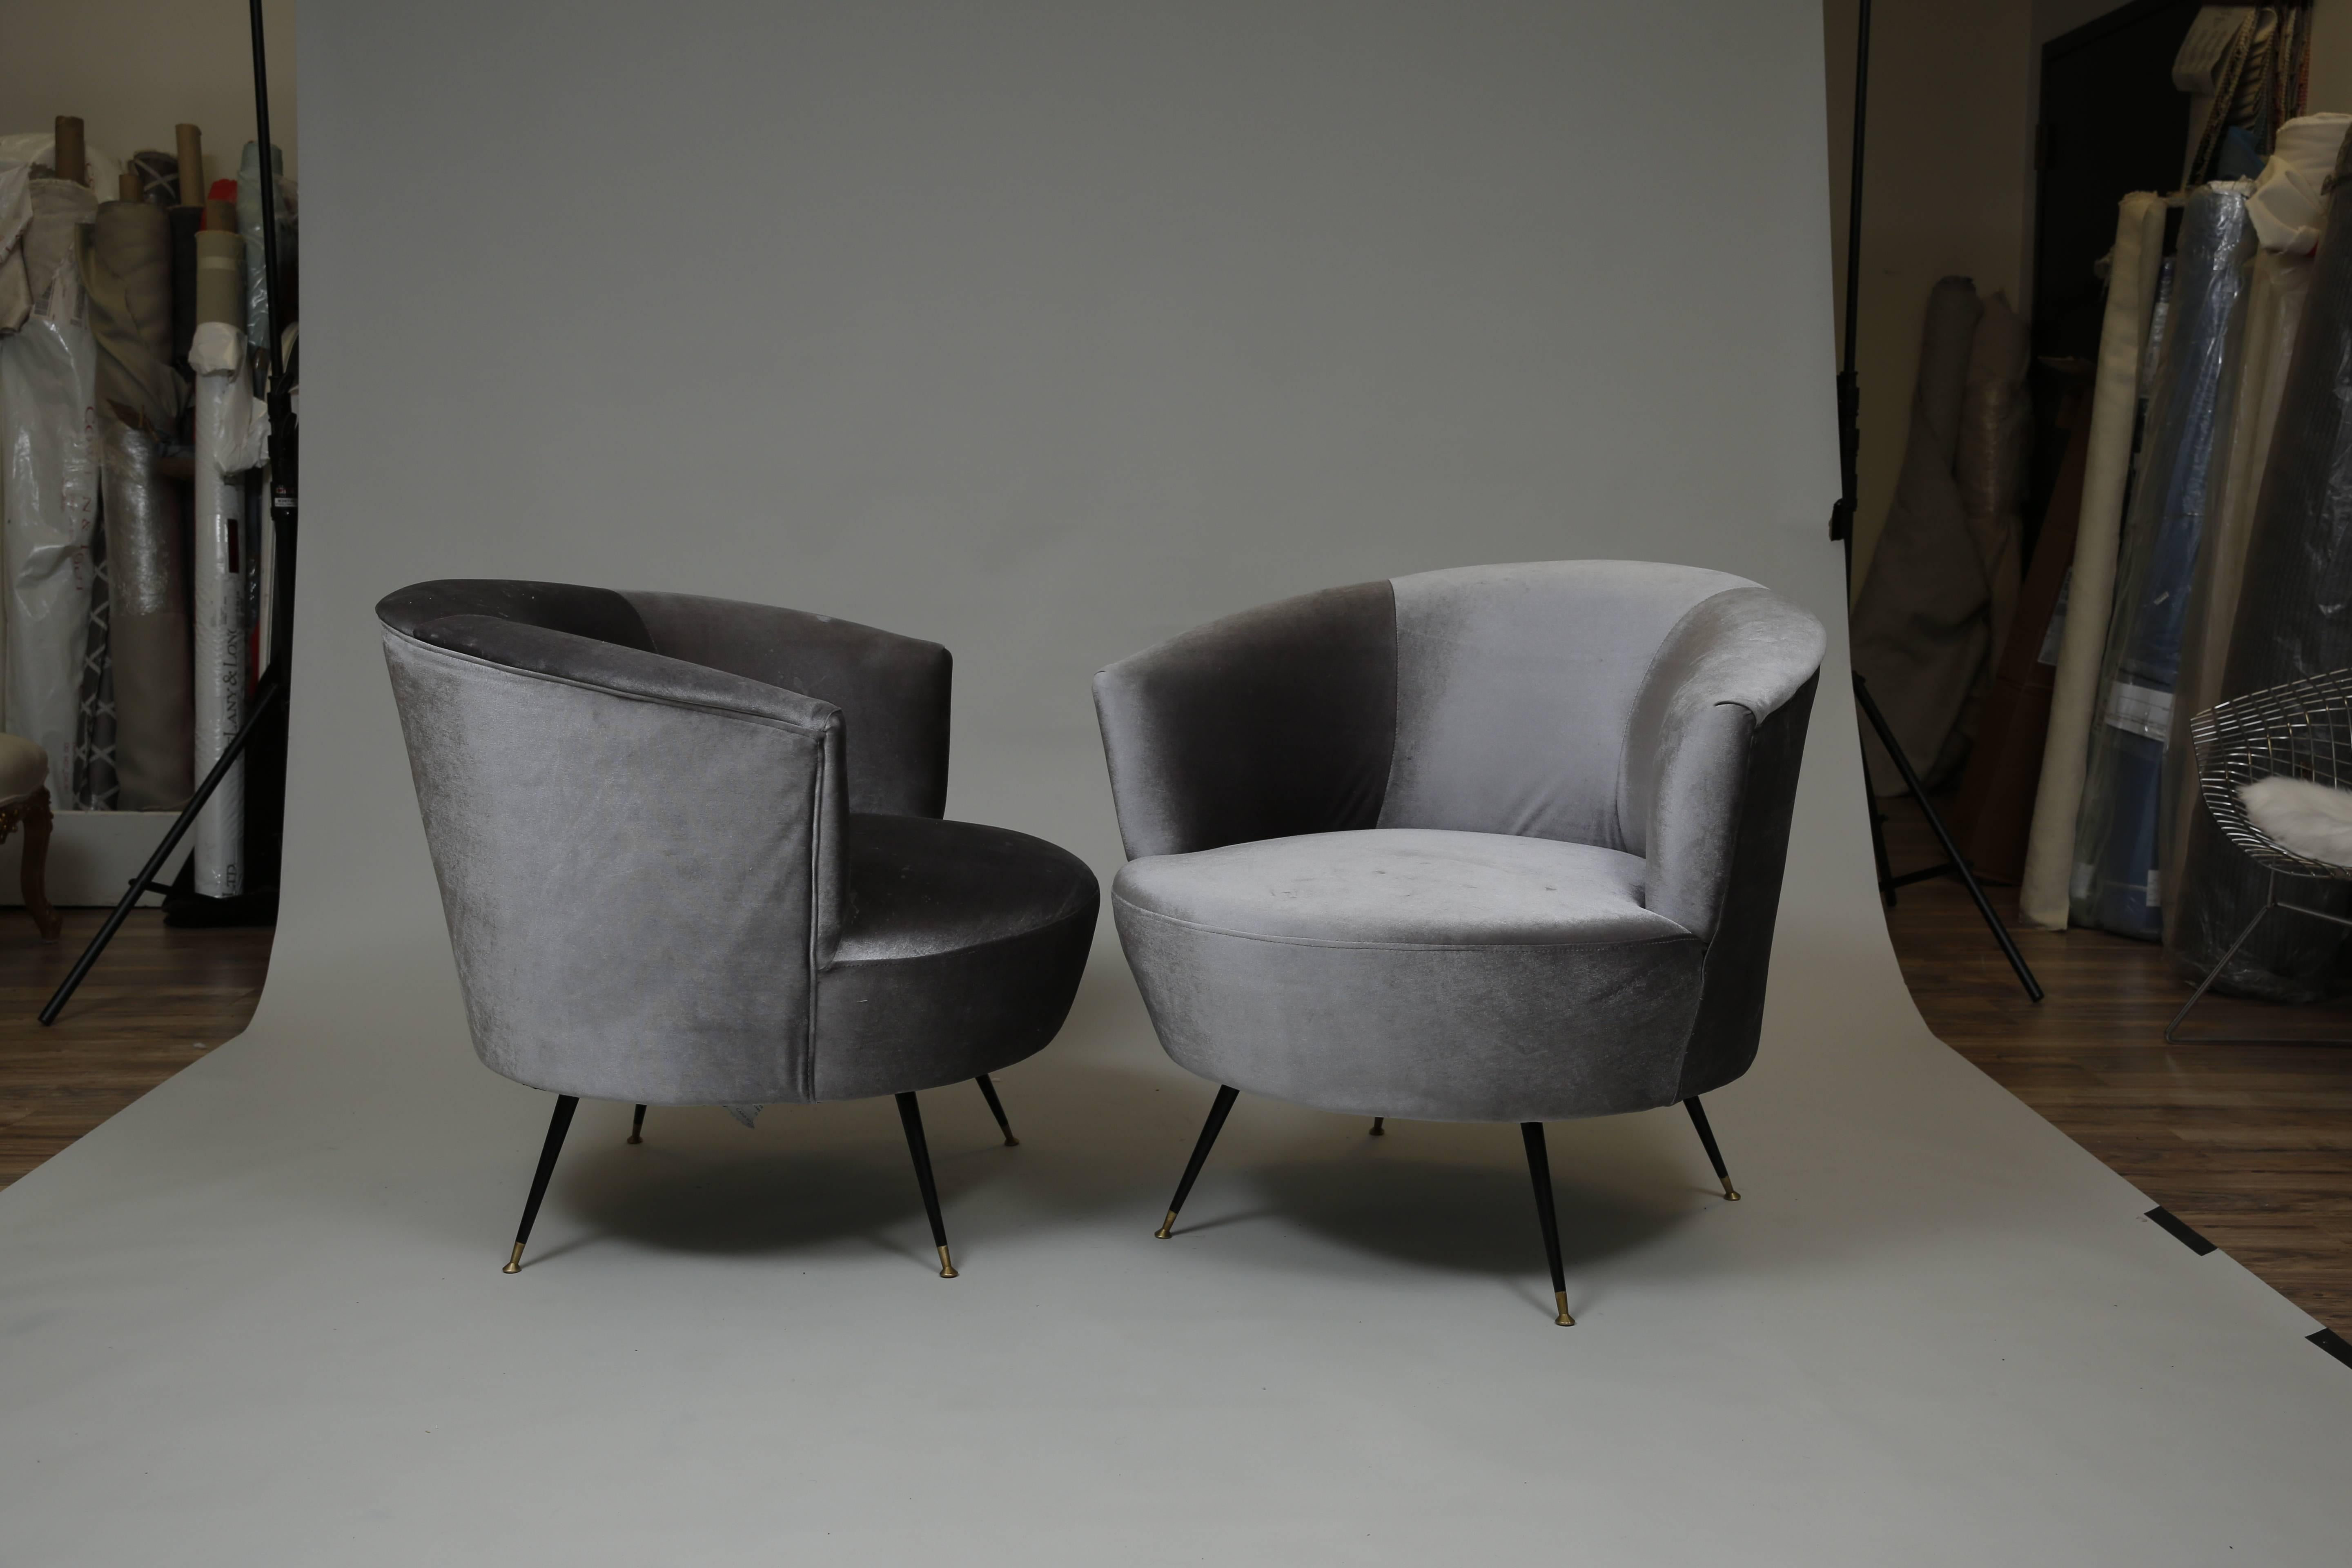 Italian influenced set of chairs newly reupholstered in graphite grey Kravet velvet with original brass tipped splayed legs.